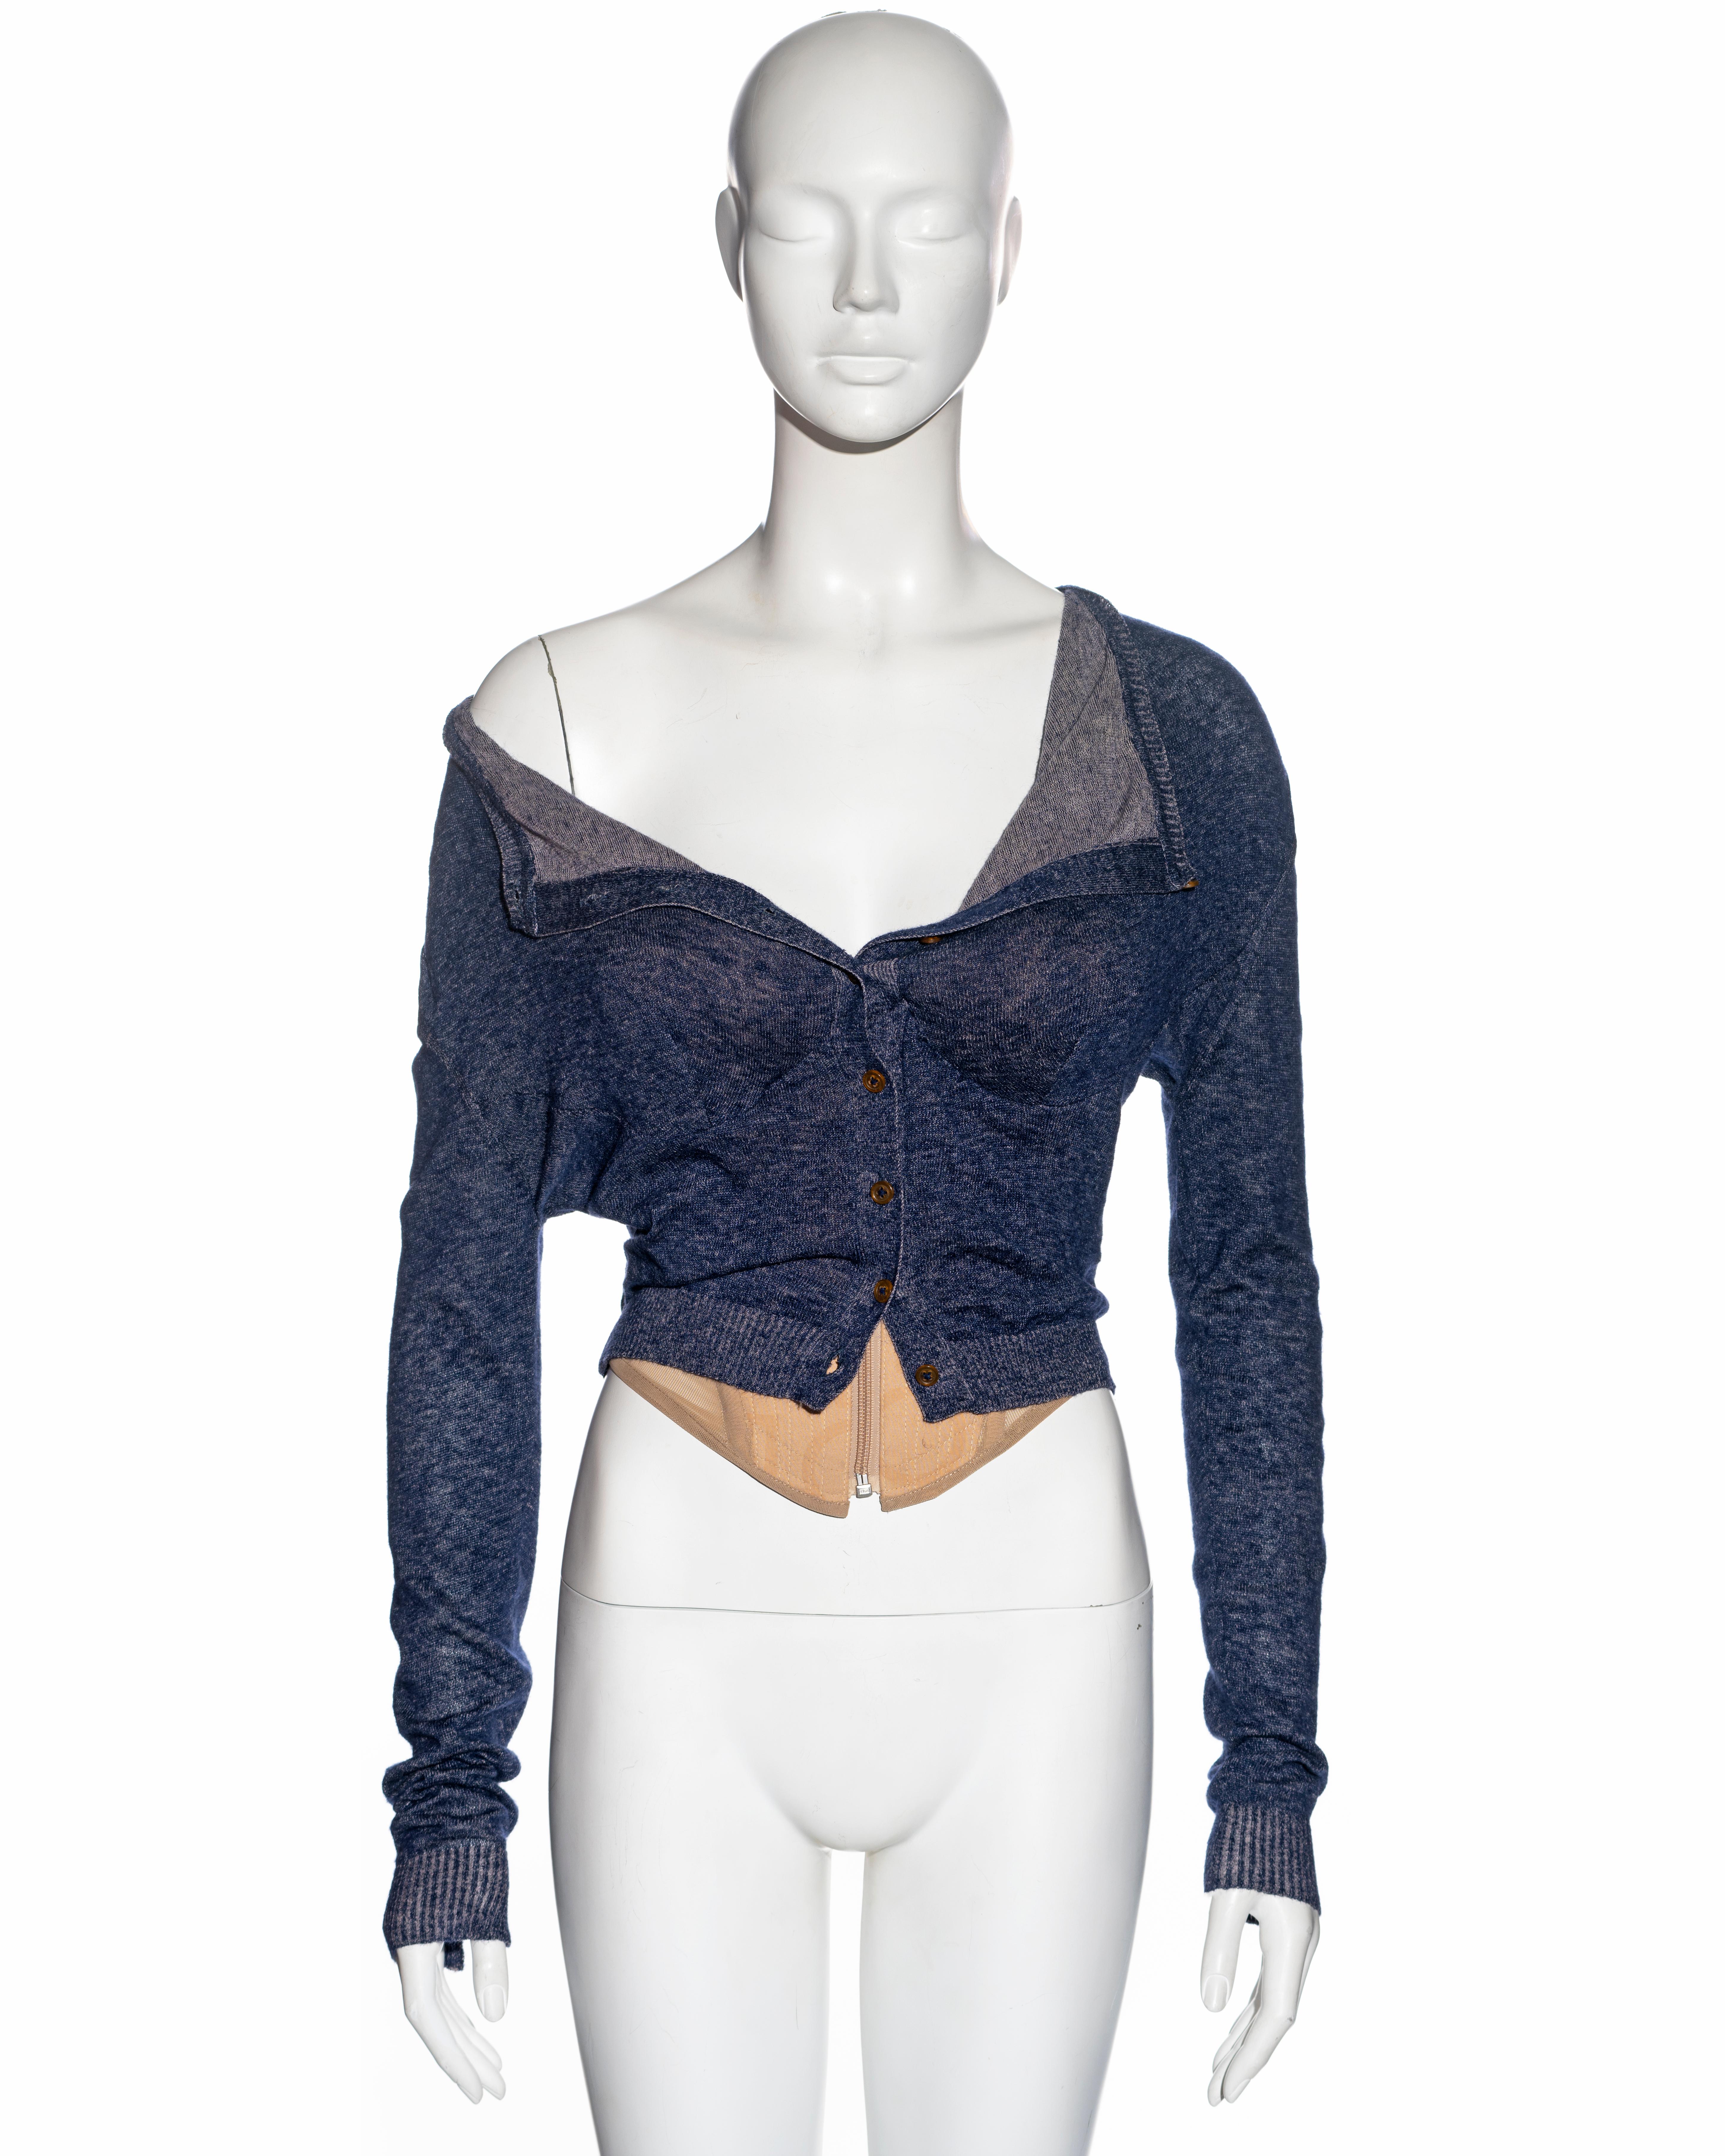 ▪ Vivienne Westwood 'Big Boobs' cardigan corset
▪ Sold by One of a Kind Archive
▪ Nude corset with exaggerated padded bra
▪ Zip closure at the centre front
▪ Attached blue cardigan with straight neckline 
▪ Size: Small
▪ Fall-Winter 2008

All